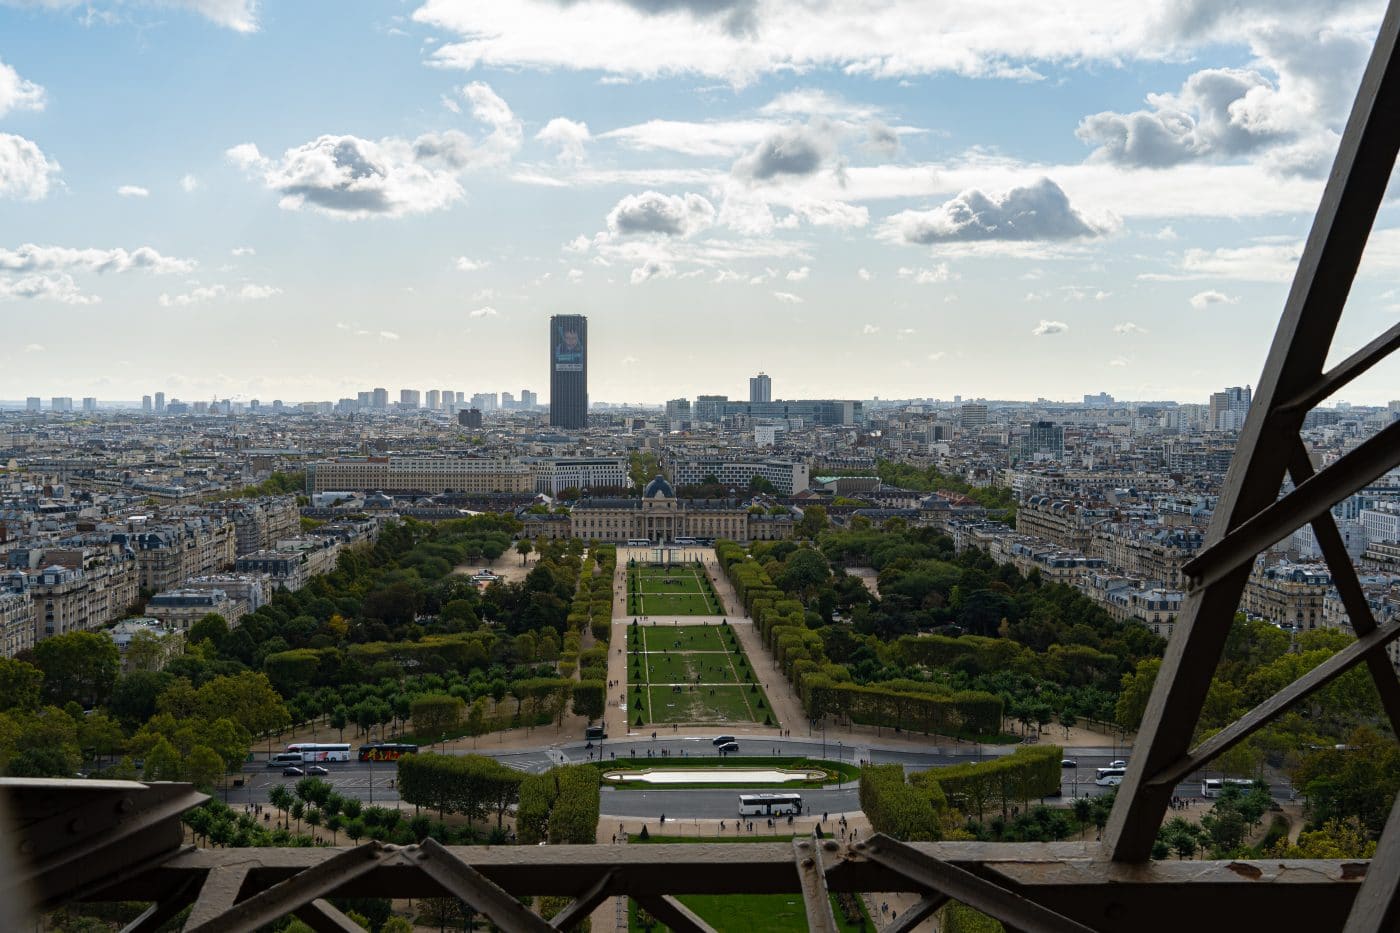 View from the top of the tower - Picture of Eiffel Tower